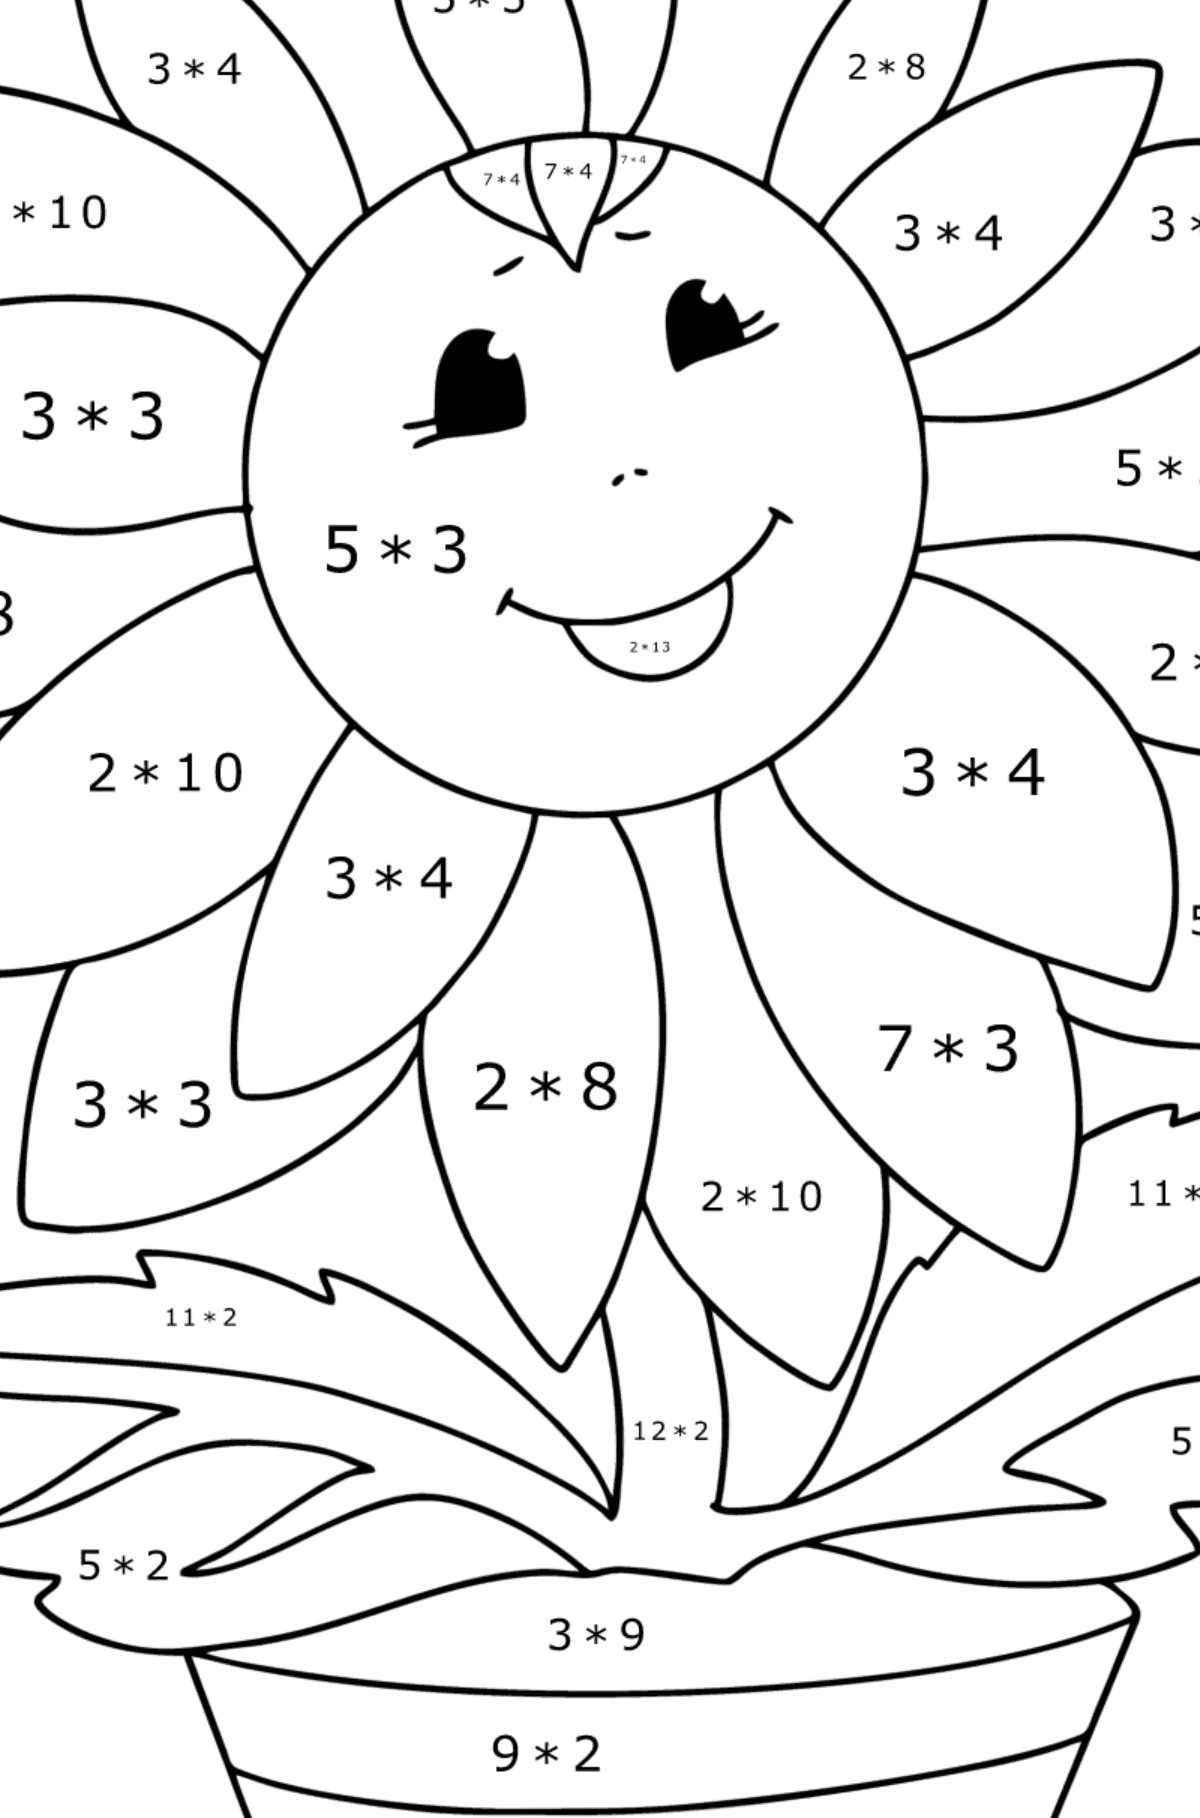 Sunflower with eyes coloring page - Math Coloring - Multiplication for Kids